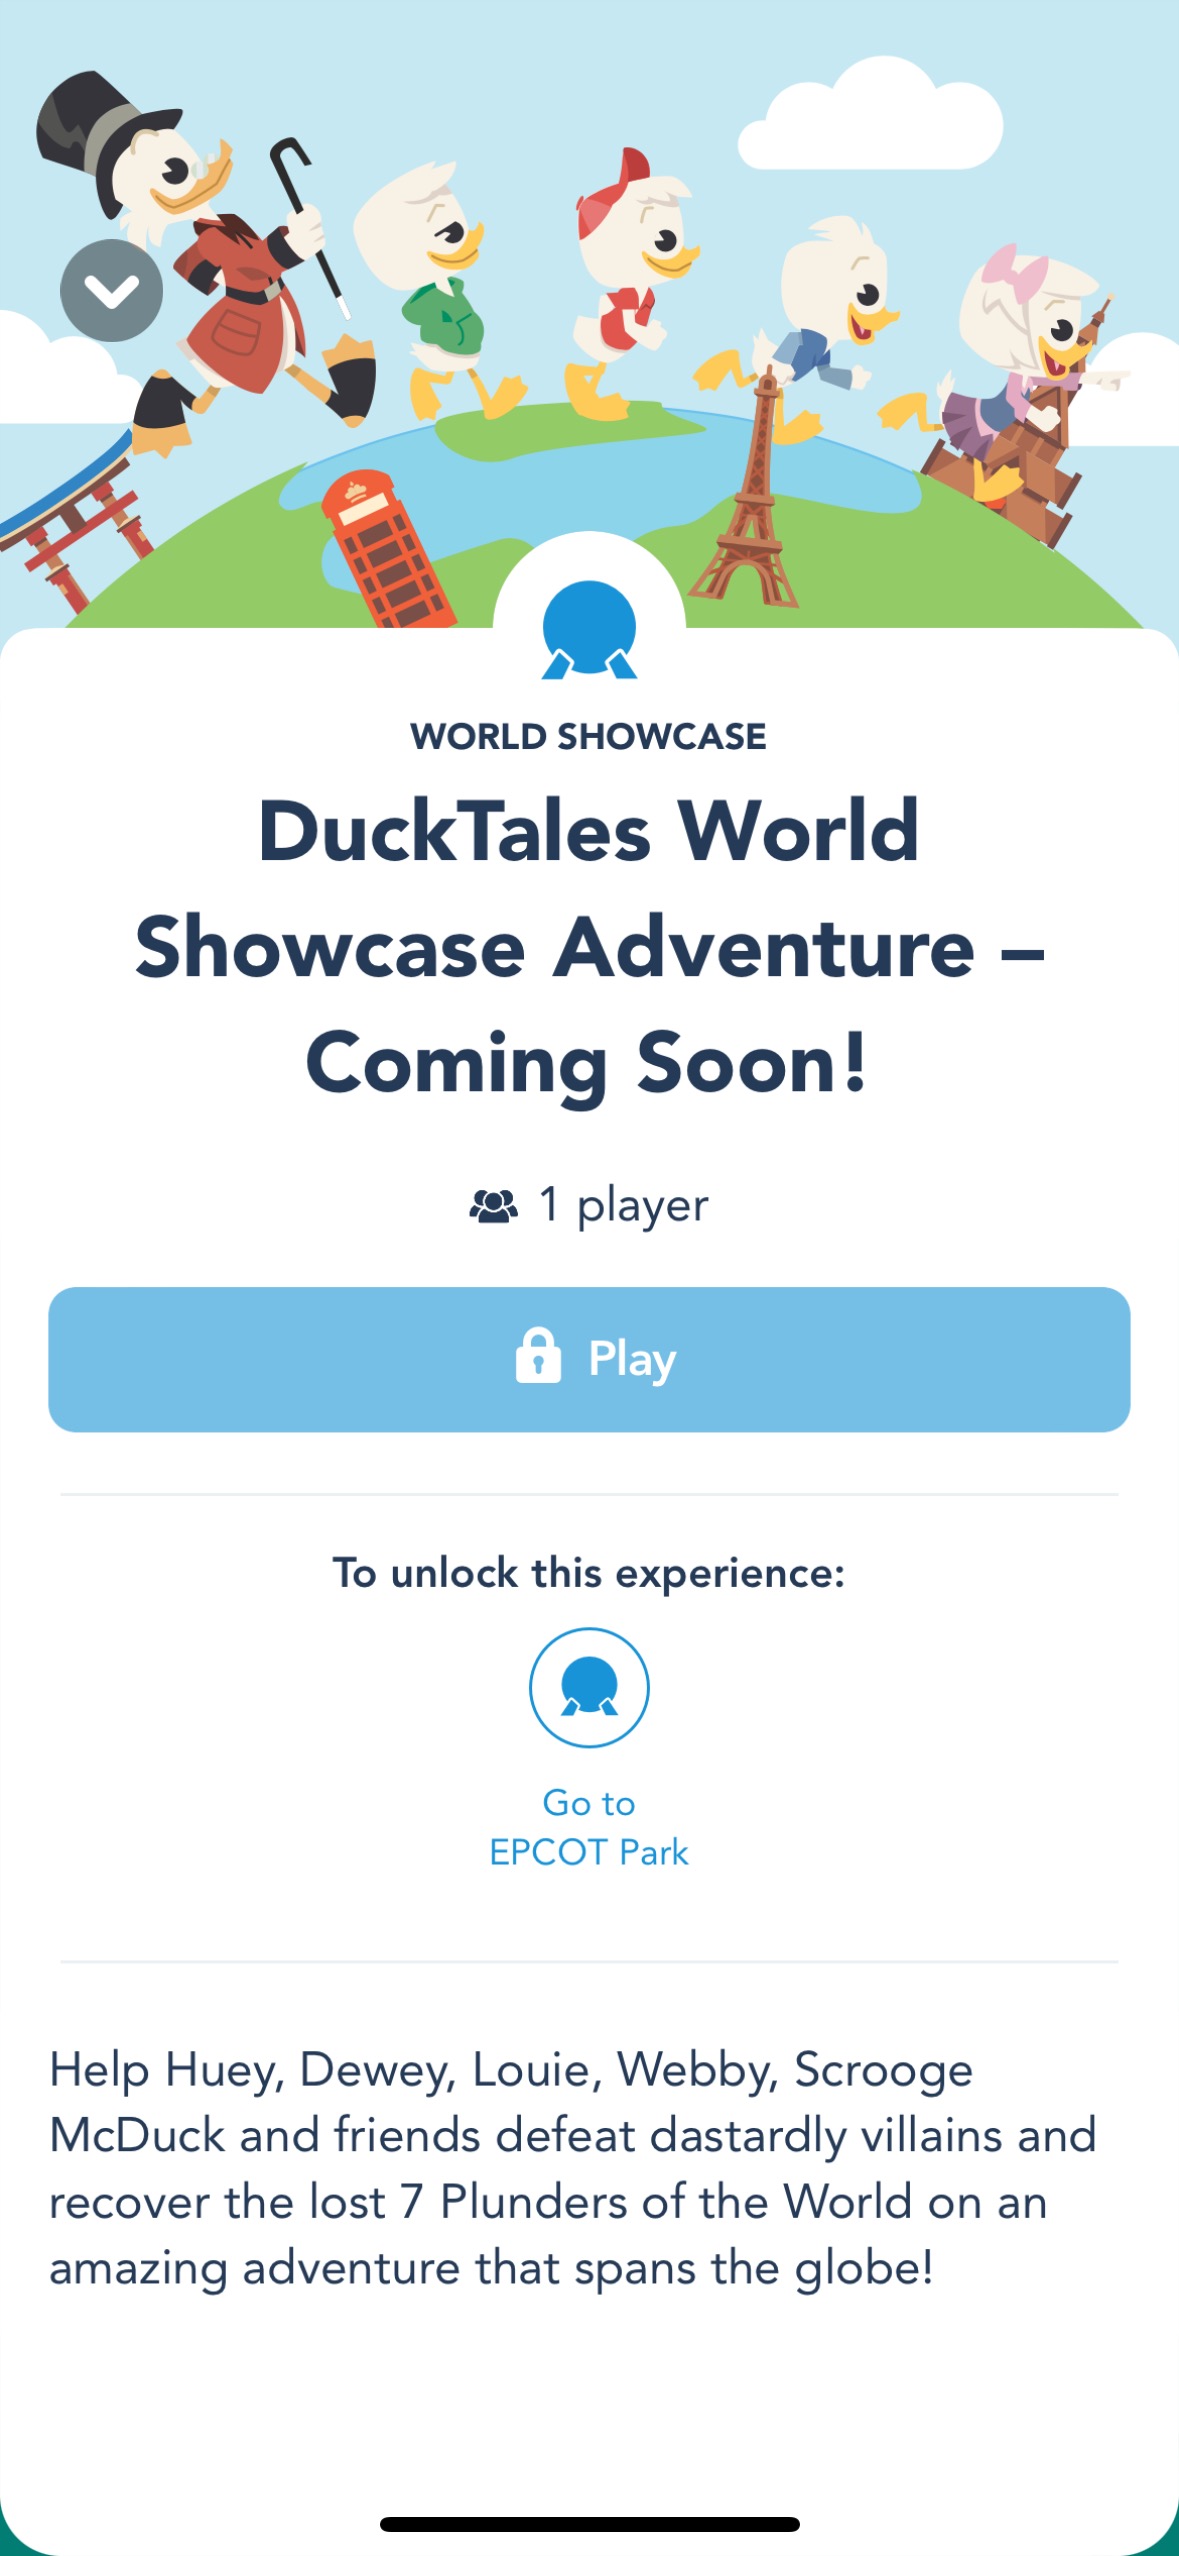 Duck Life 8 - Adventure Coming Soon - Epic Games Store